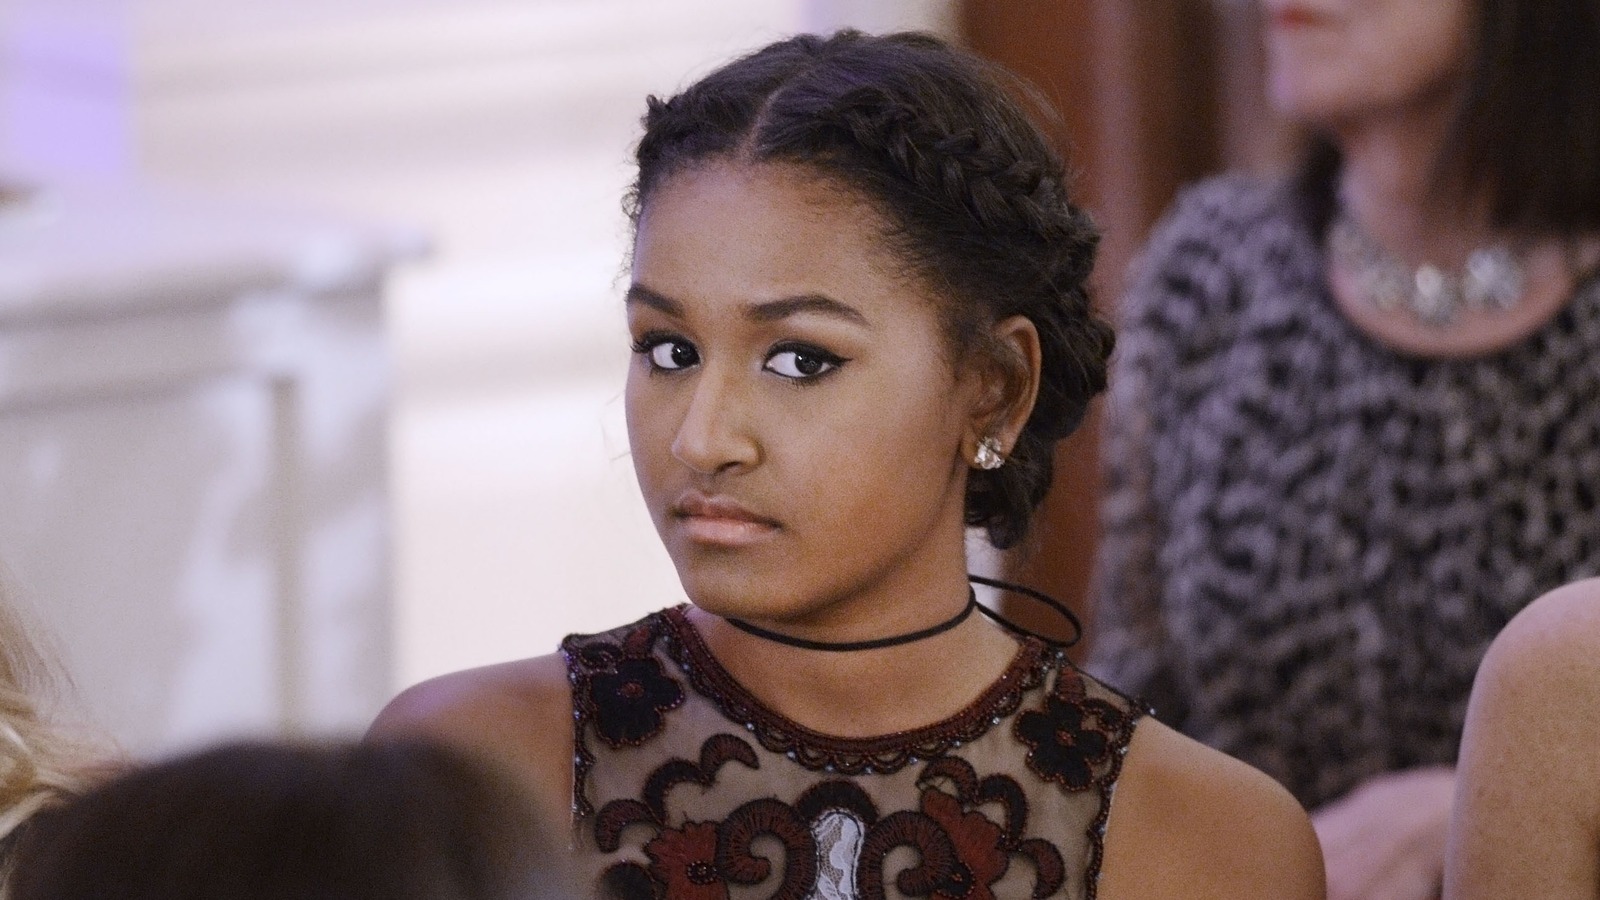 Sasha Obama's Top 2 Most Daring Outfits Since Leaving The White House